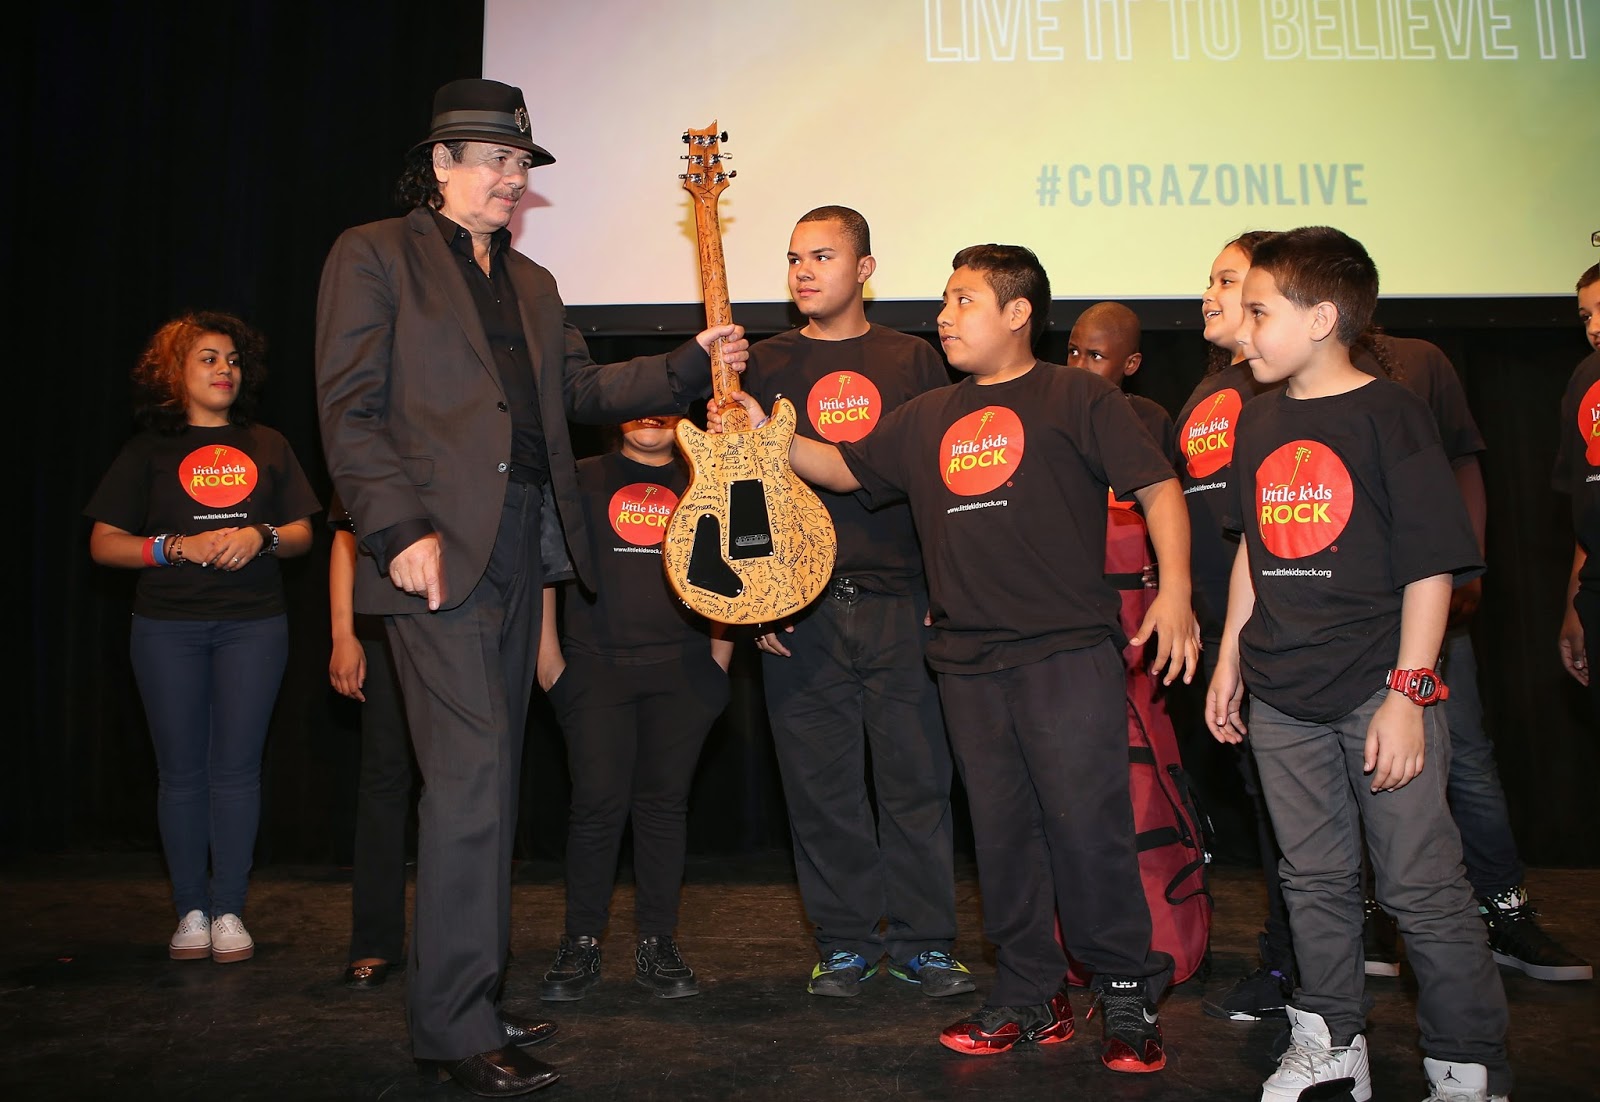 HBO Latino Santana-Corazón: Live from Mexico: Live It to Believe It Premiere Event. 